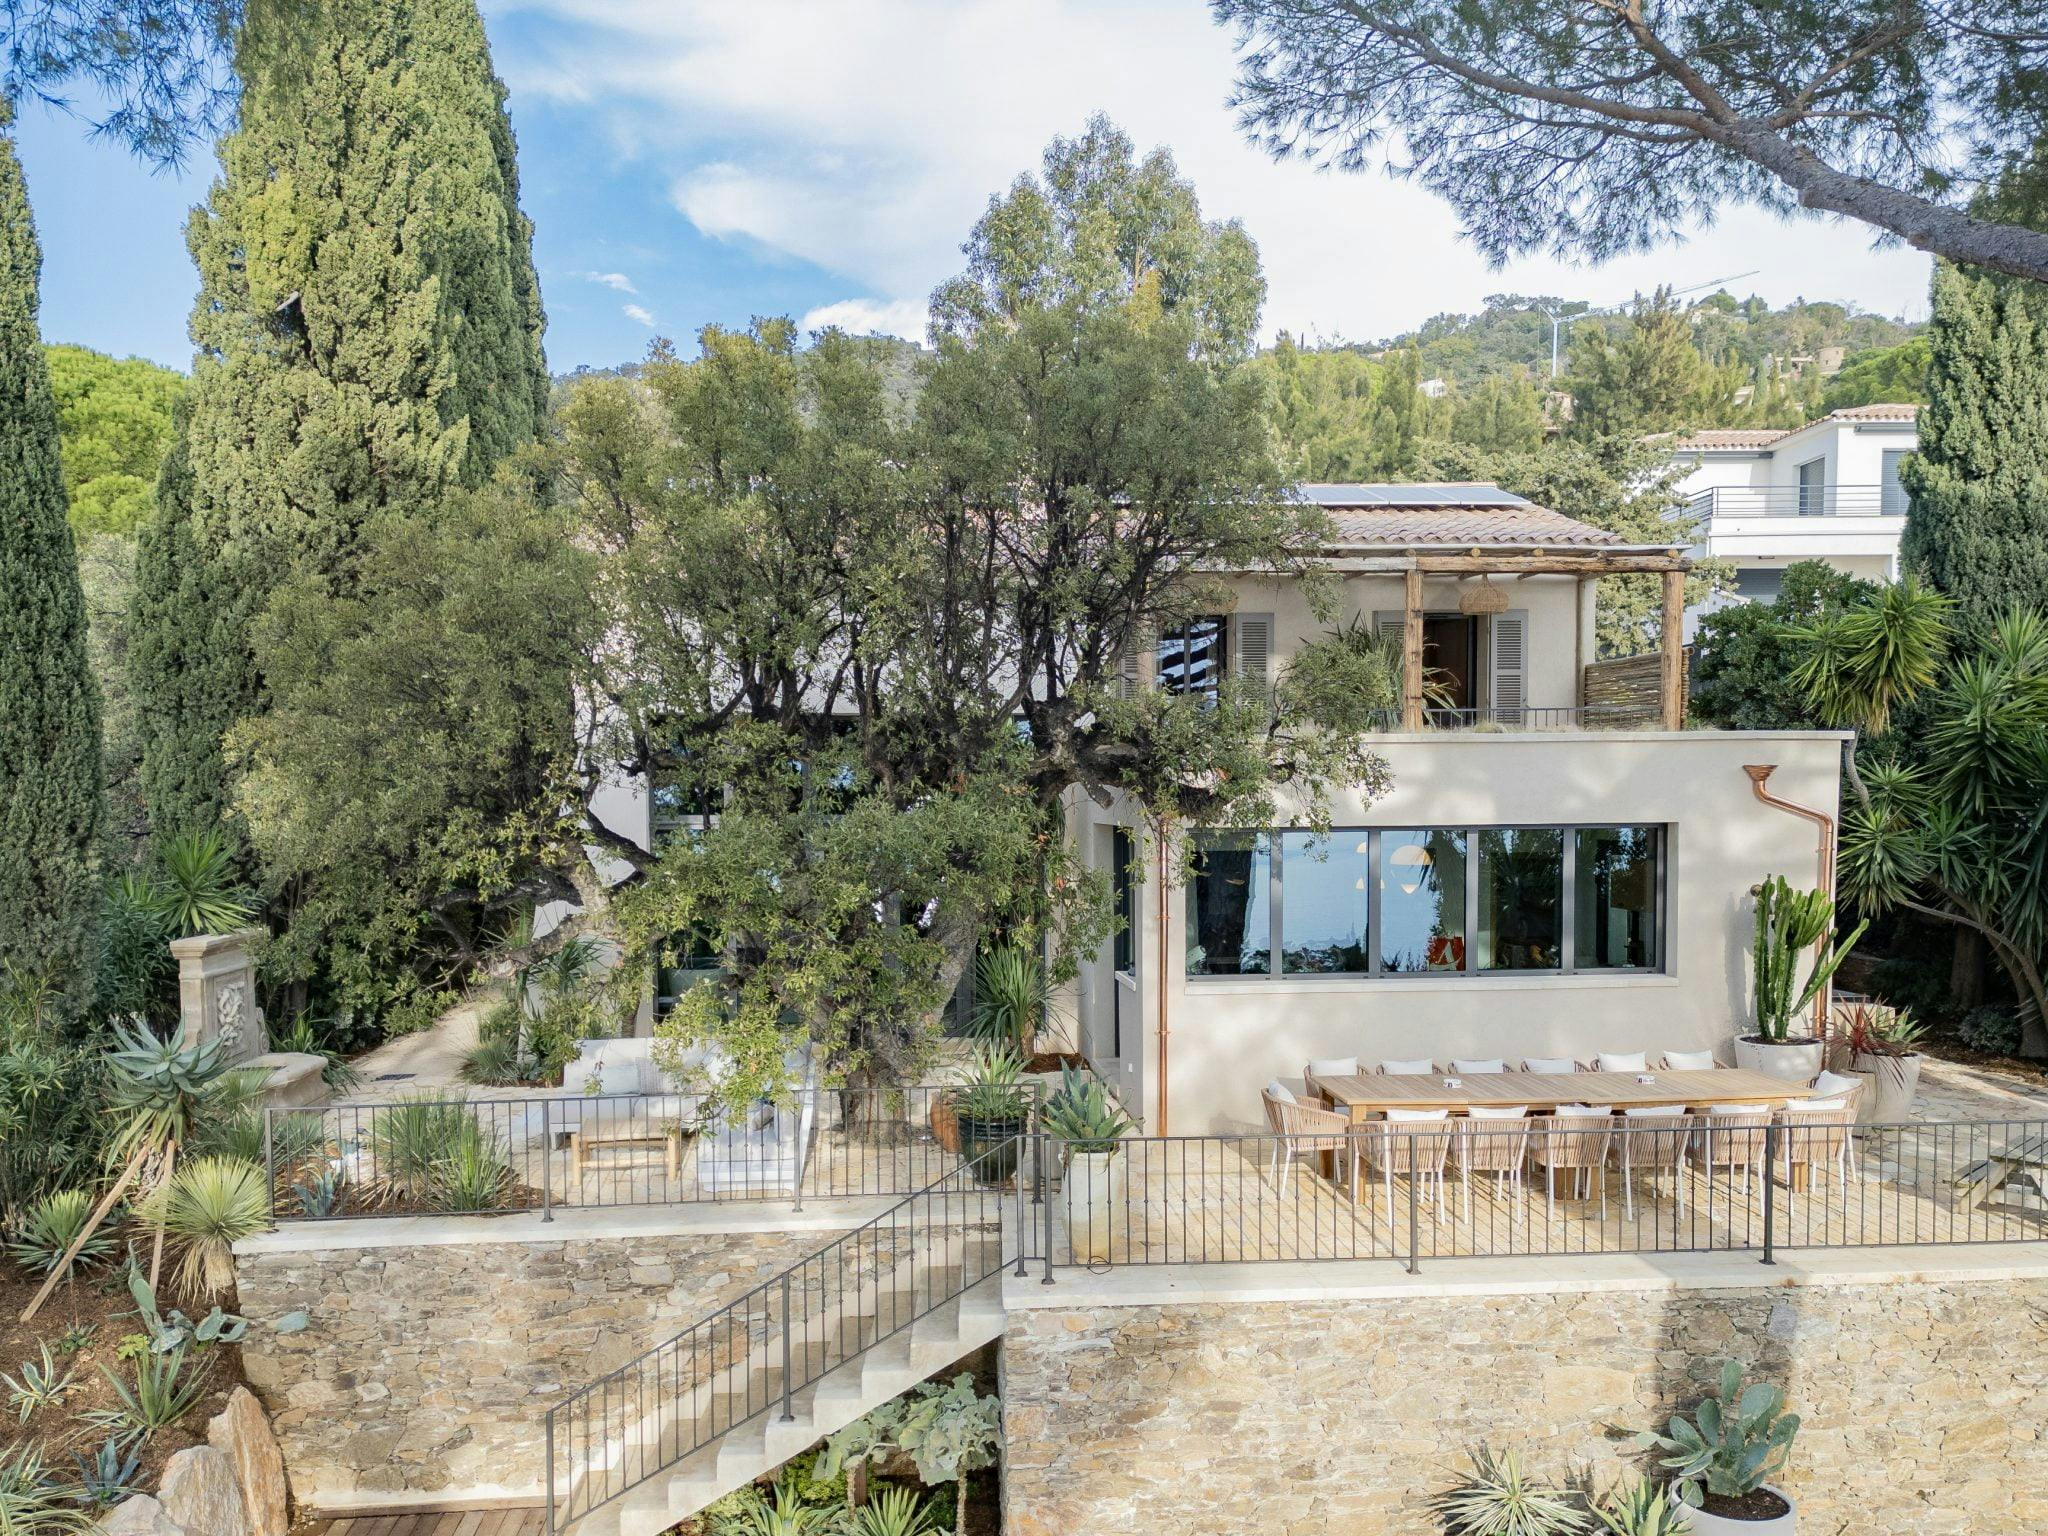 The contemporary Provencal-style house with its staircase and terrace overlooking the swimming pool